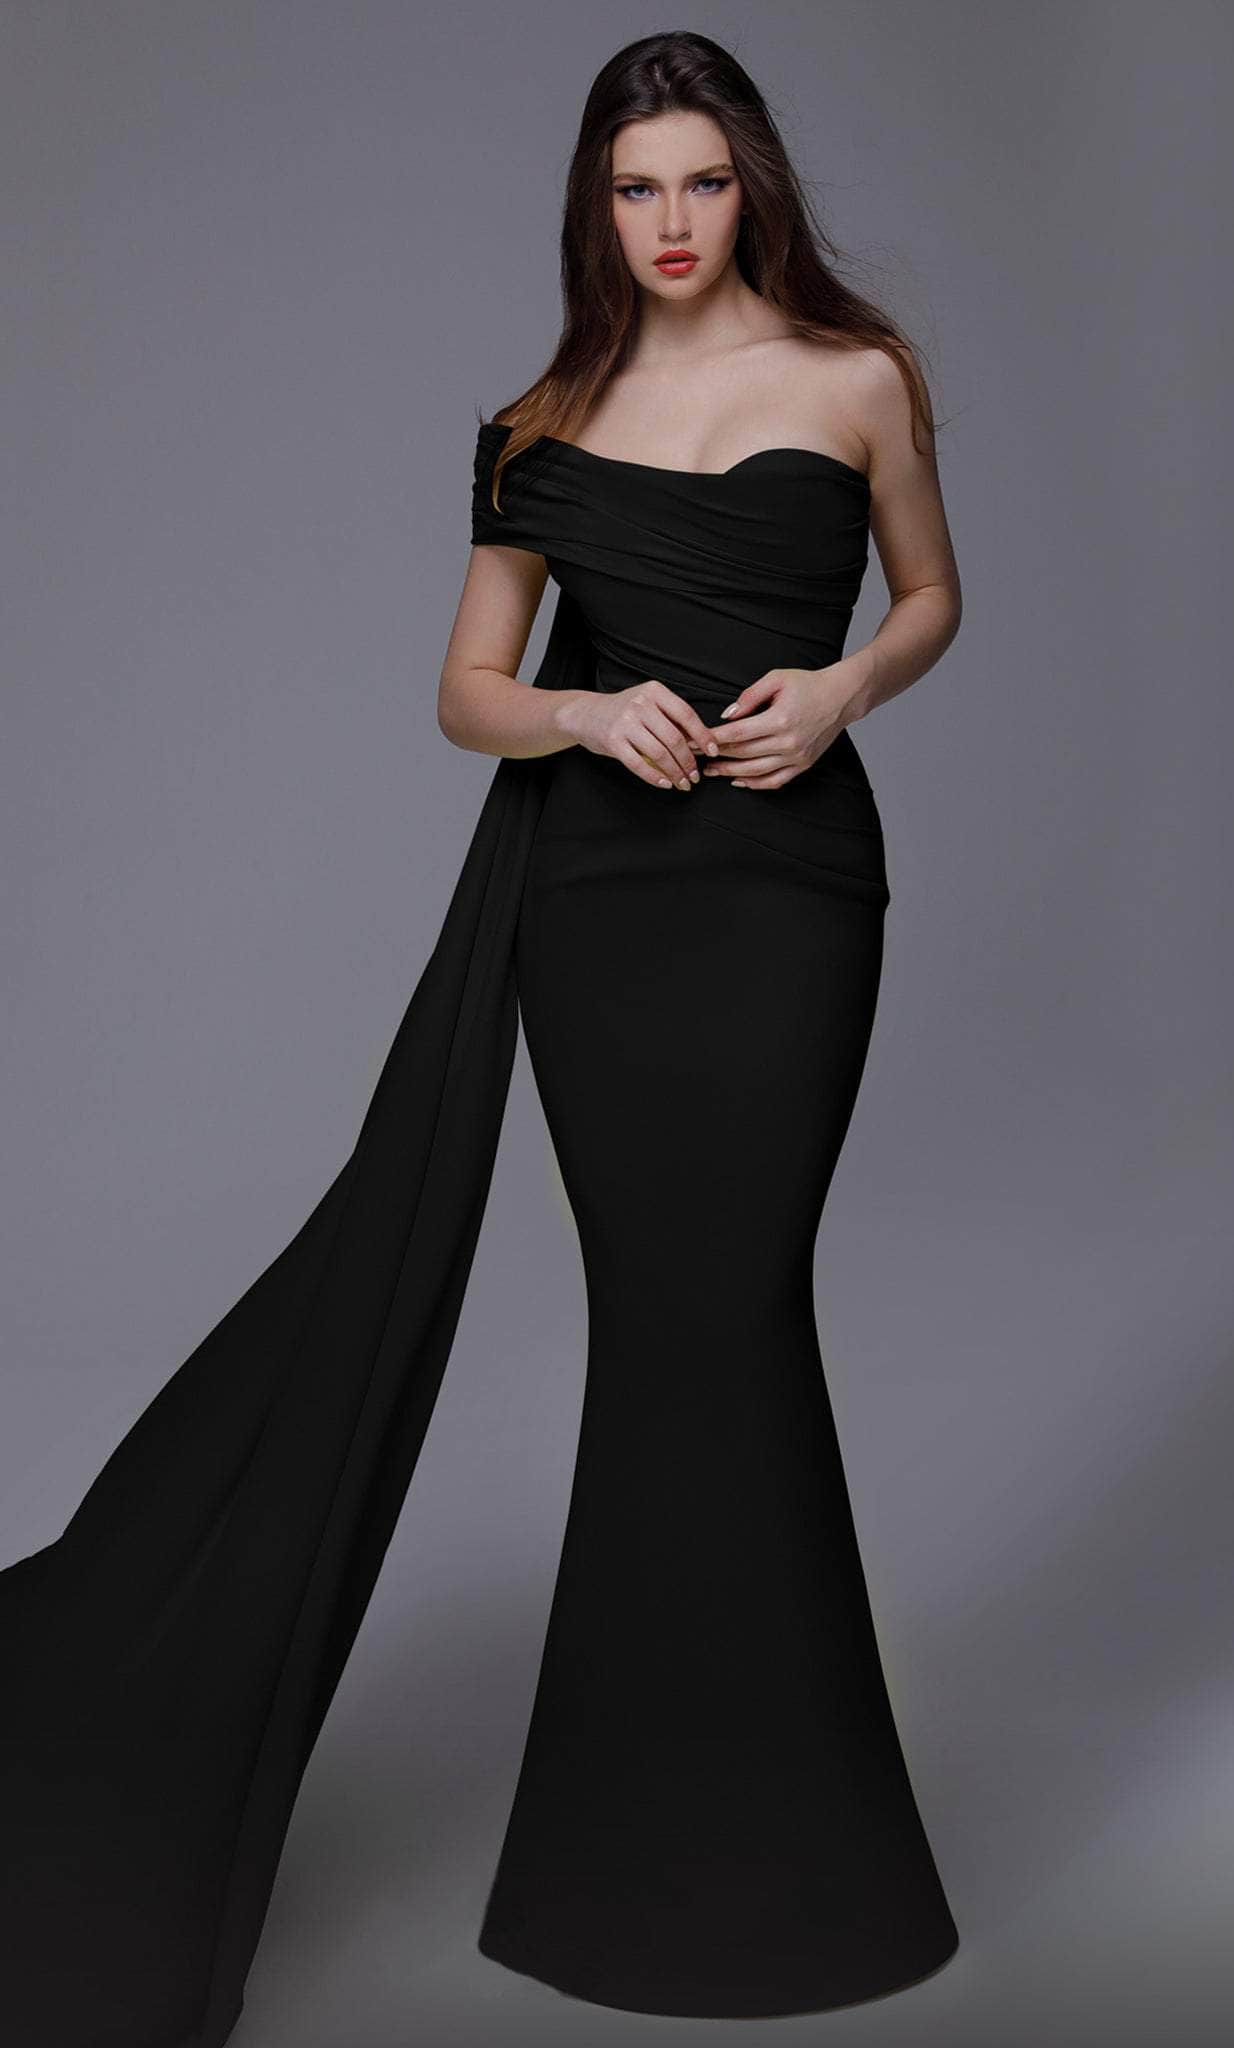 Image of MNM Couture 2718 - Ruched One Shoulder Evening Gown